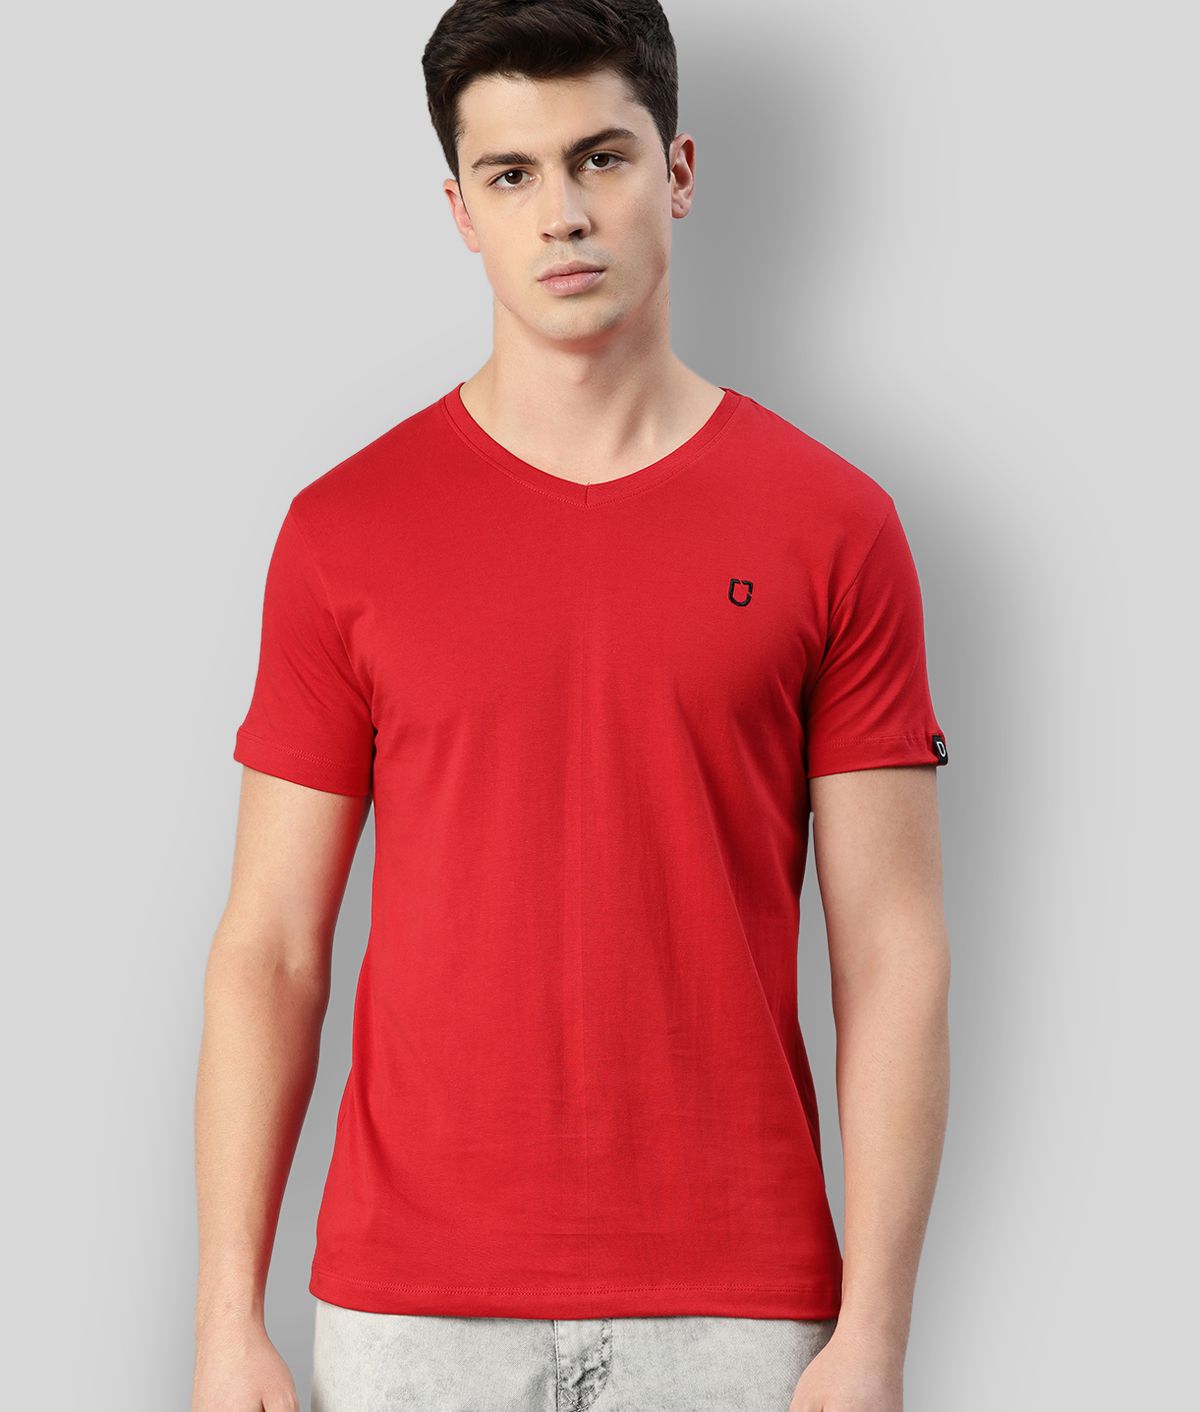     			Urbano Fashion - Red Cotton Slim Fit Men's T-Shirt ( Pack of 1 )